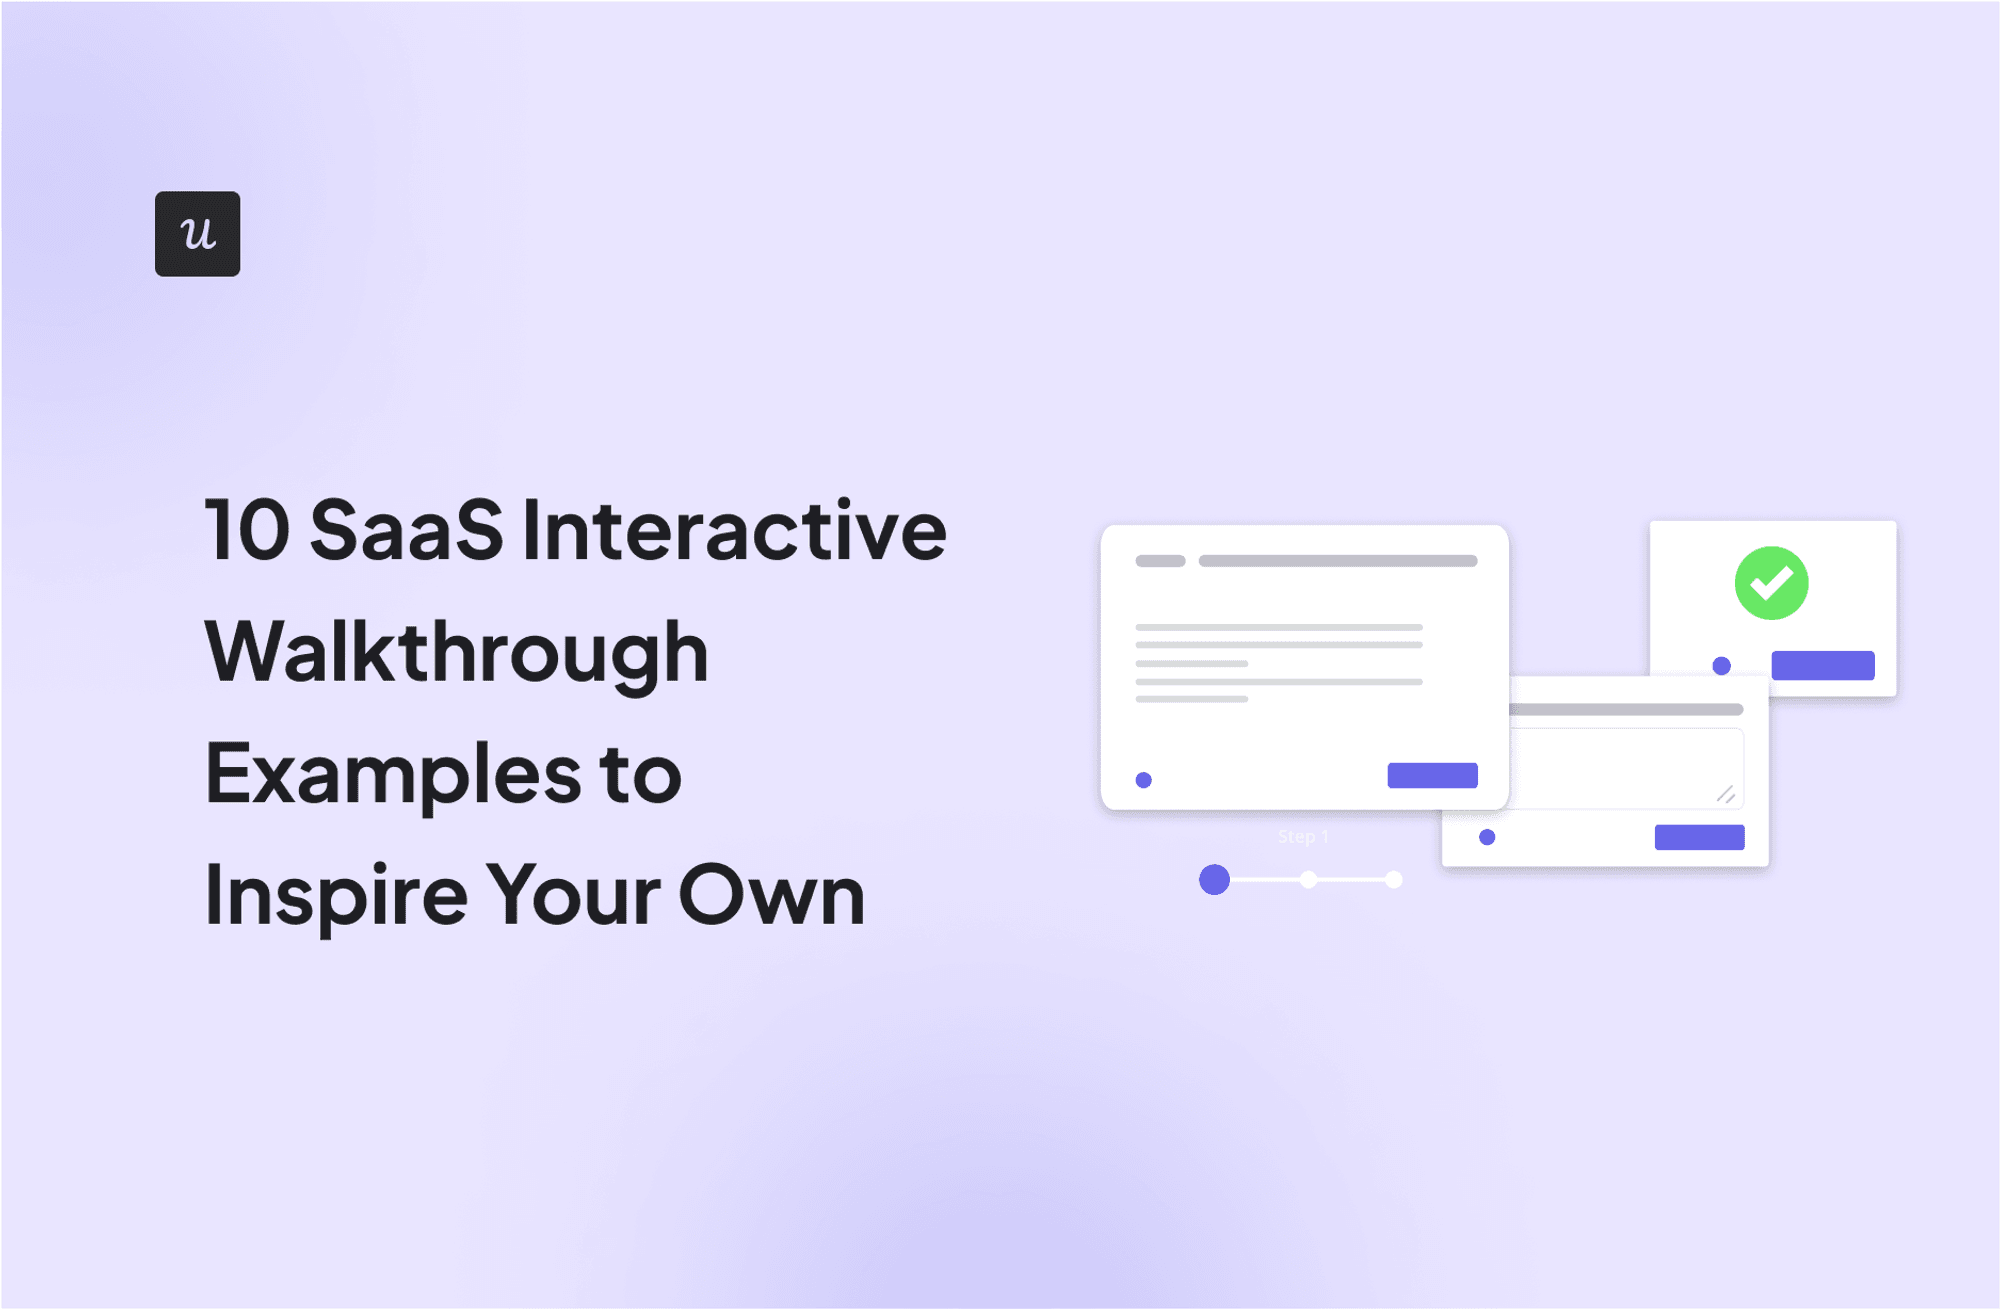 10 SaaS Interactive Walkthrough Examples to Inspire Your Own cover